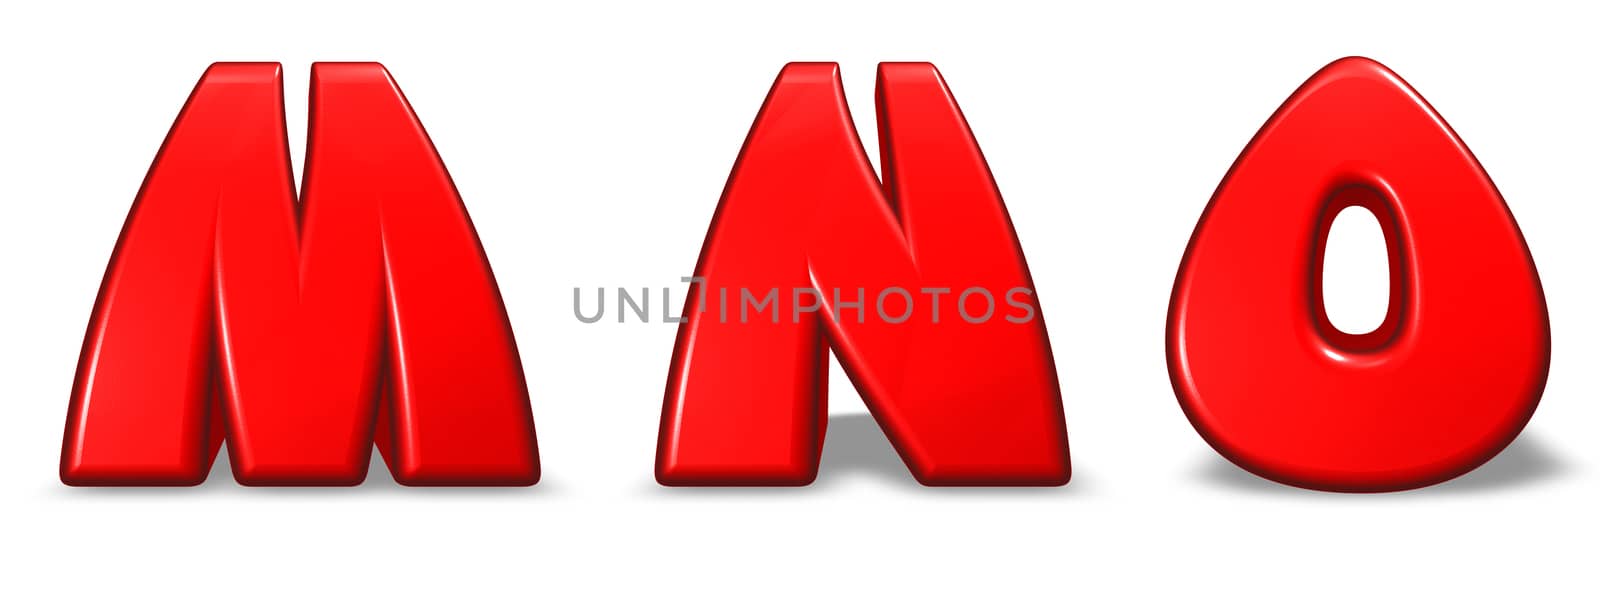 red letters m, n and o on white background - 3d illustration